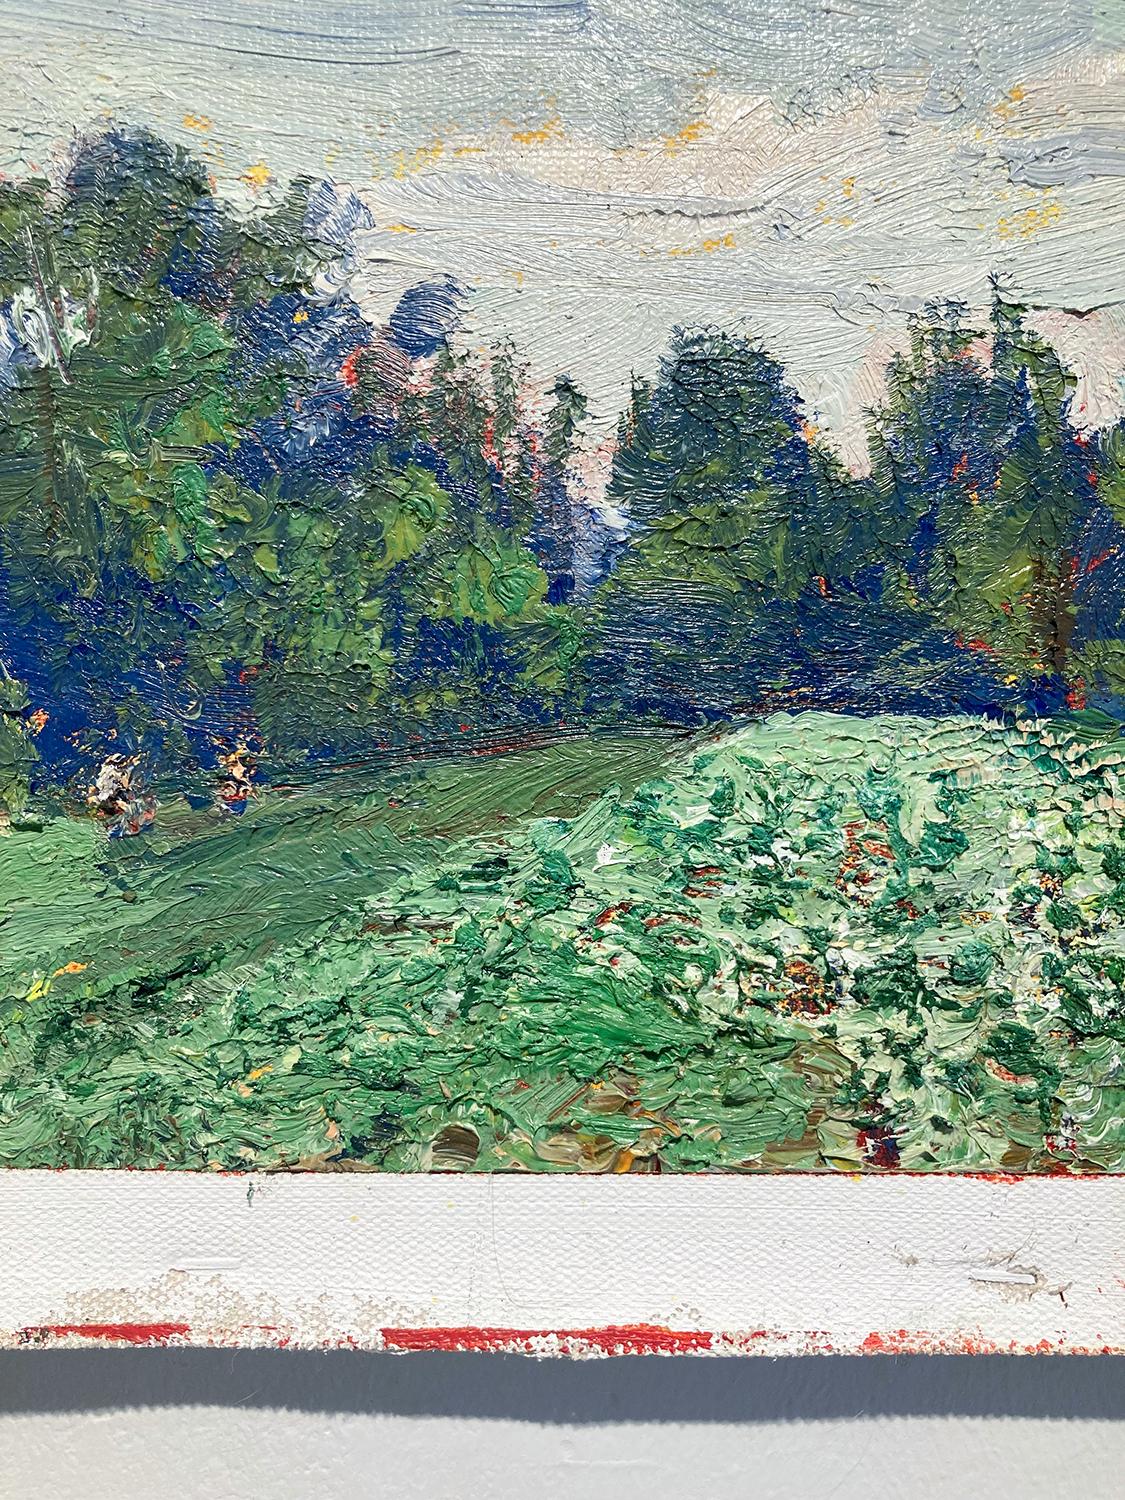 Impressionist en plein air landscape painting on linen of a lush green farm field in the country
#5968 Truehart's Potatoes, painted by Harry Orlyk in 2022
oil on linen mounted on homasote board
14 x 14.5 inches
Signed lower left

Harry Orlyk is